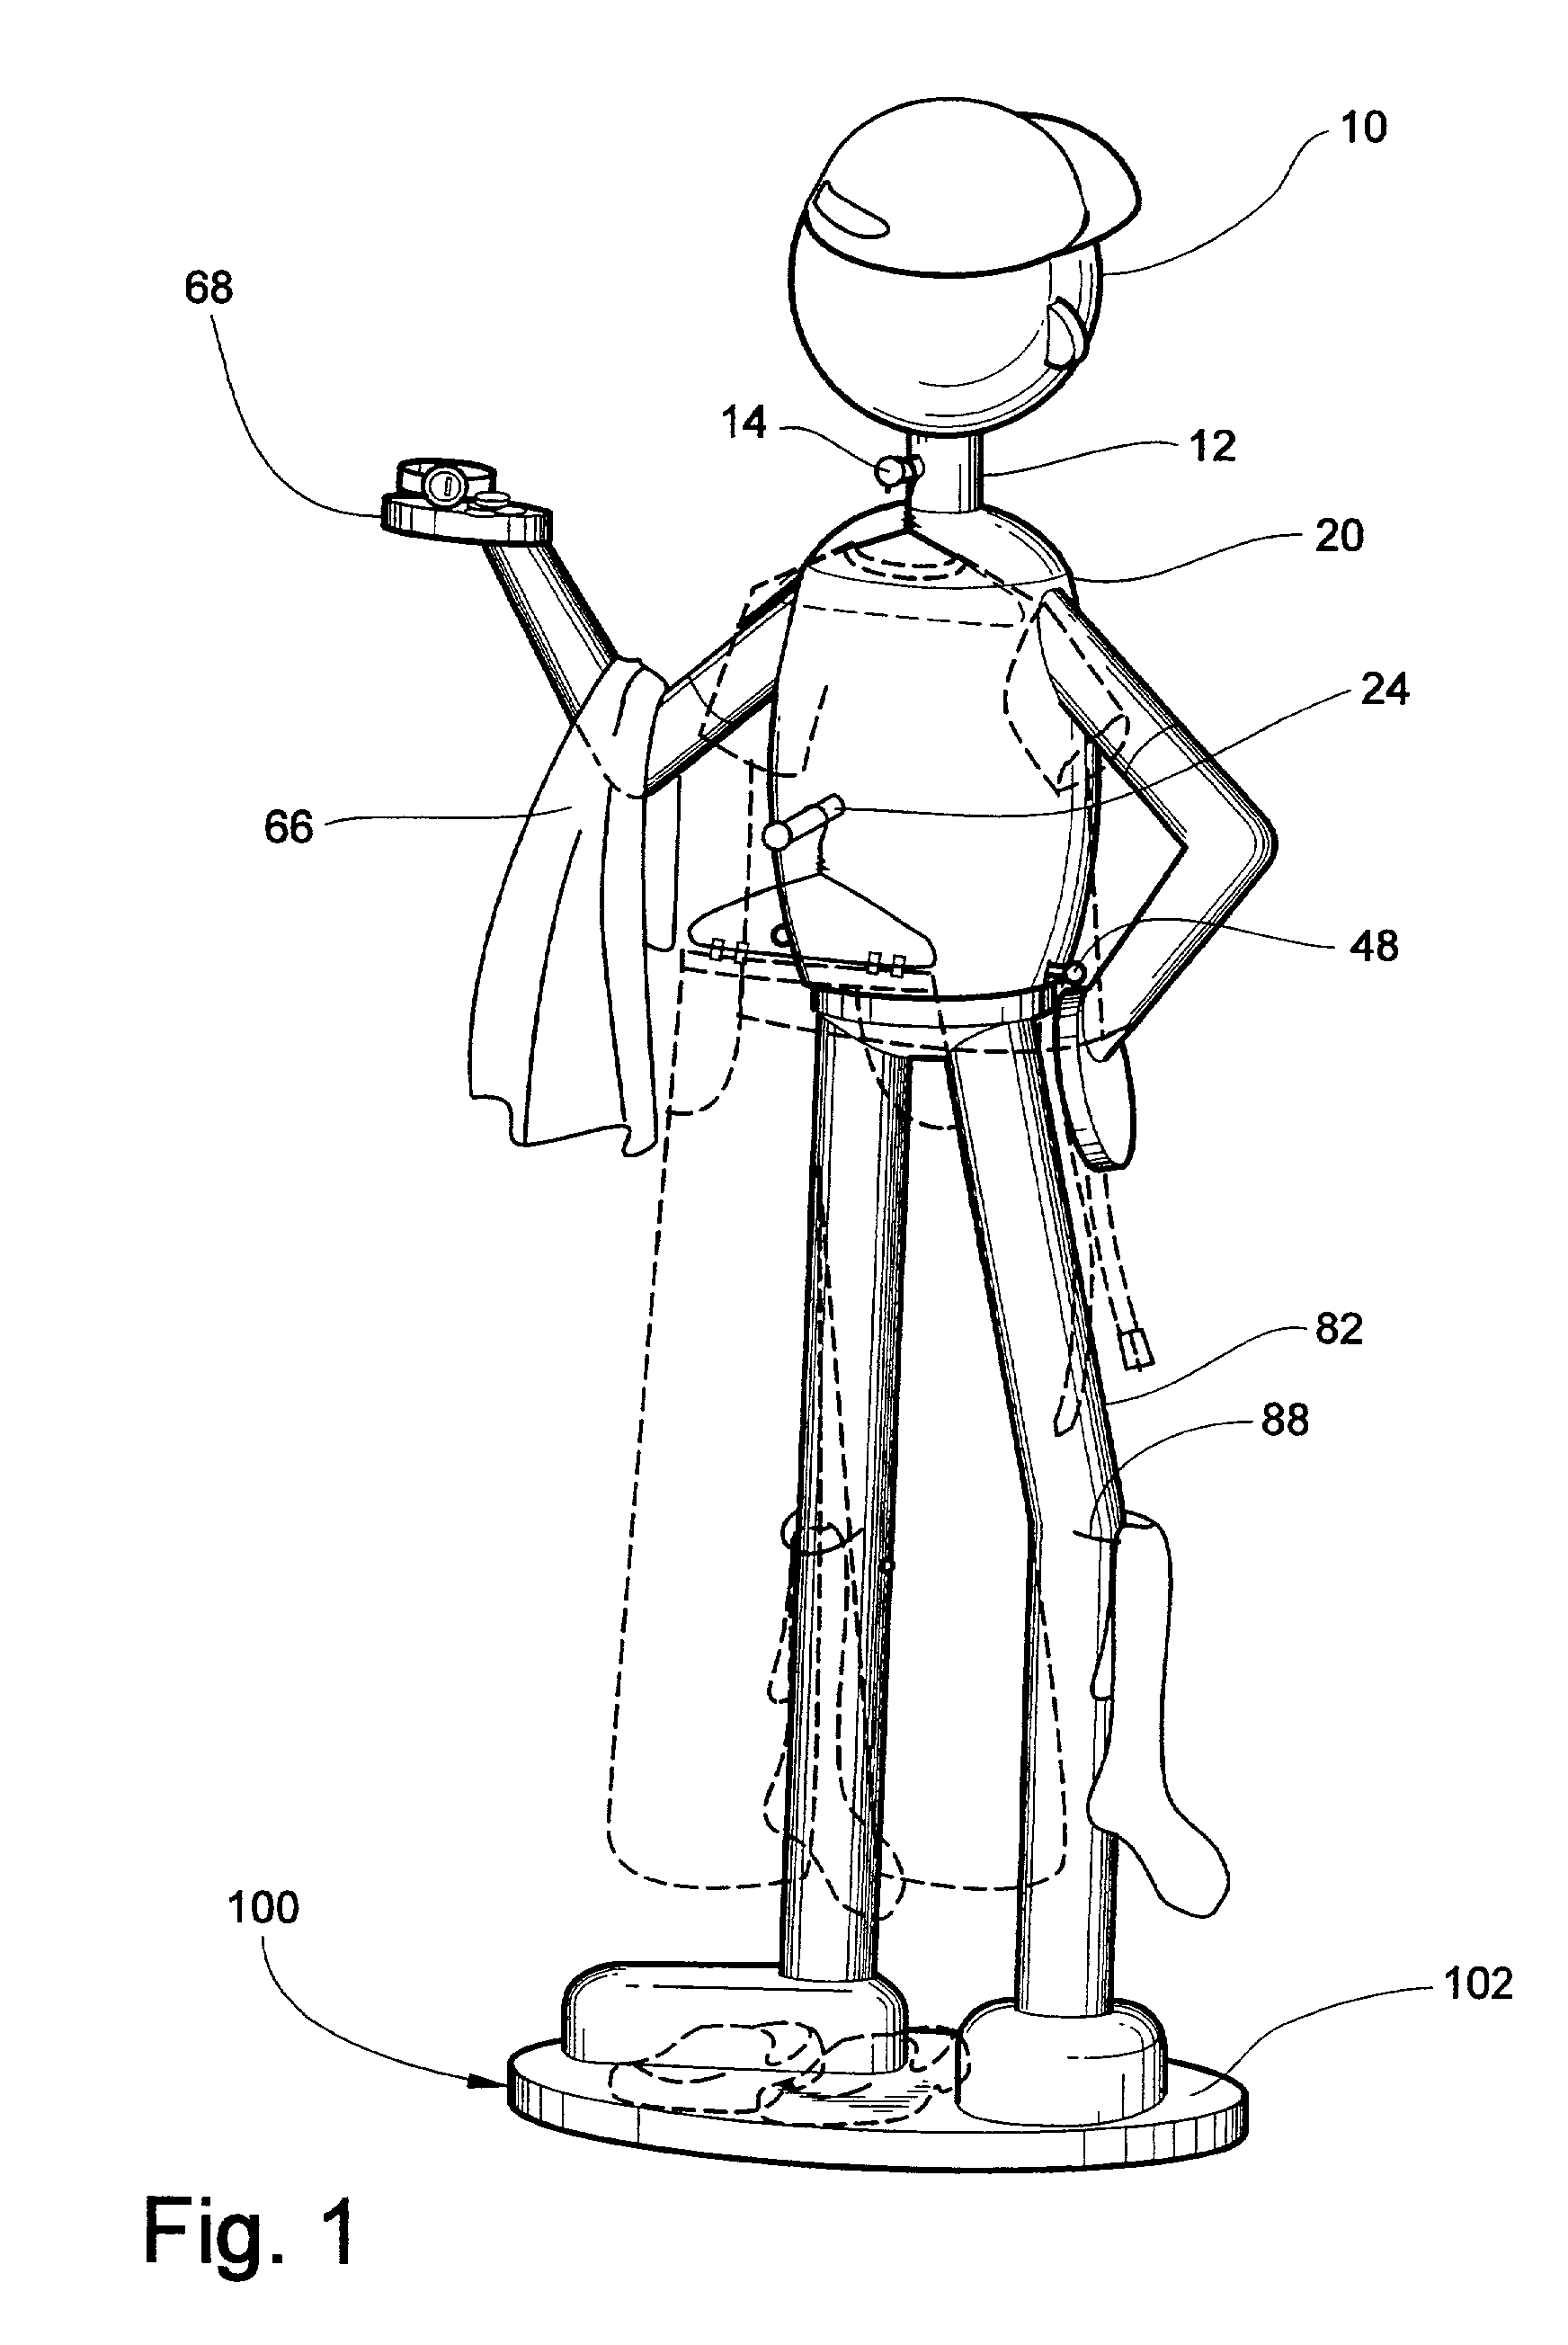 Apparatus for organizing and displaying clothing